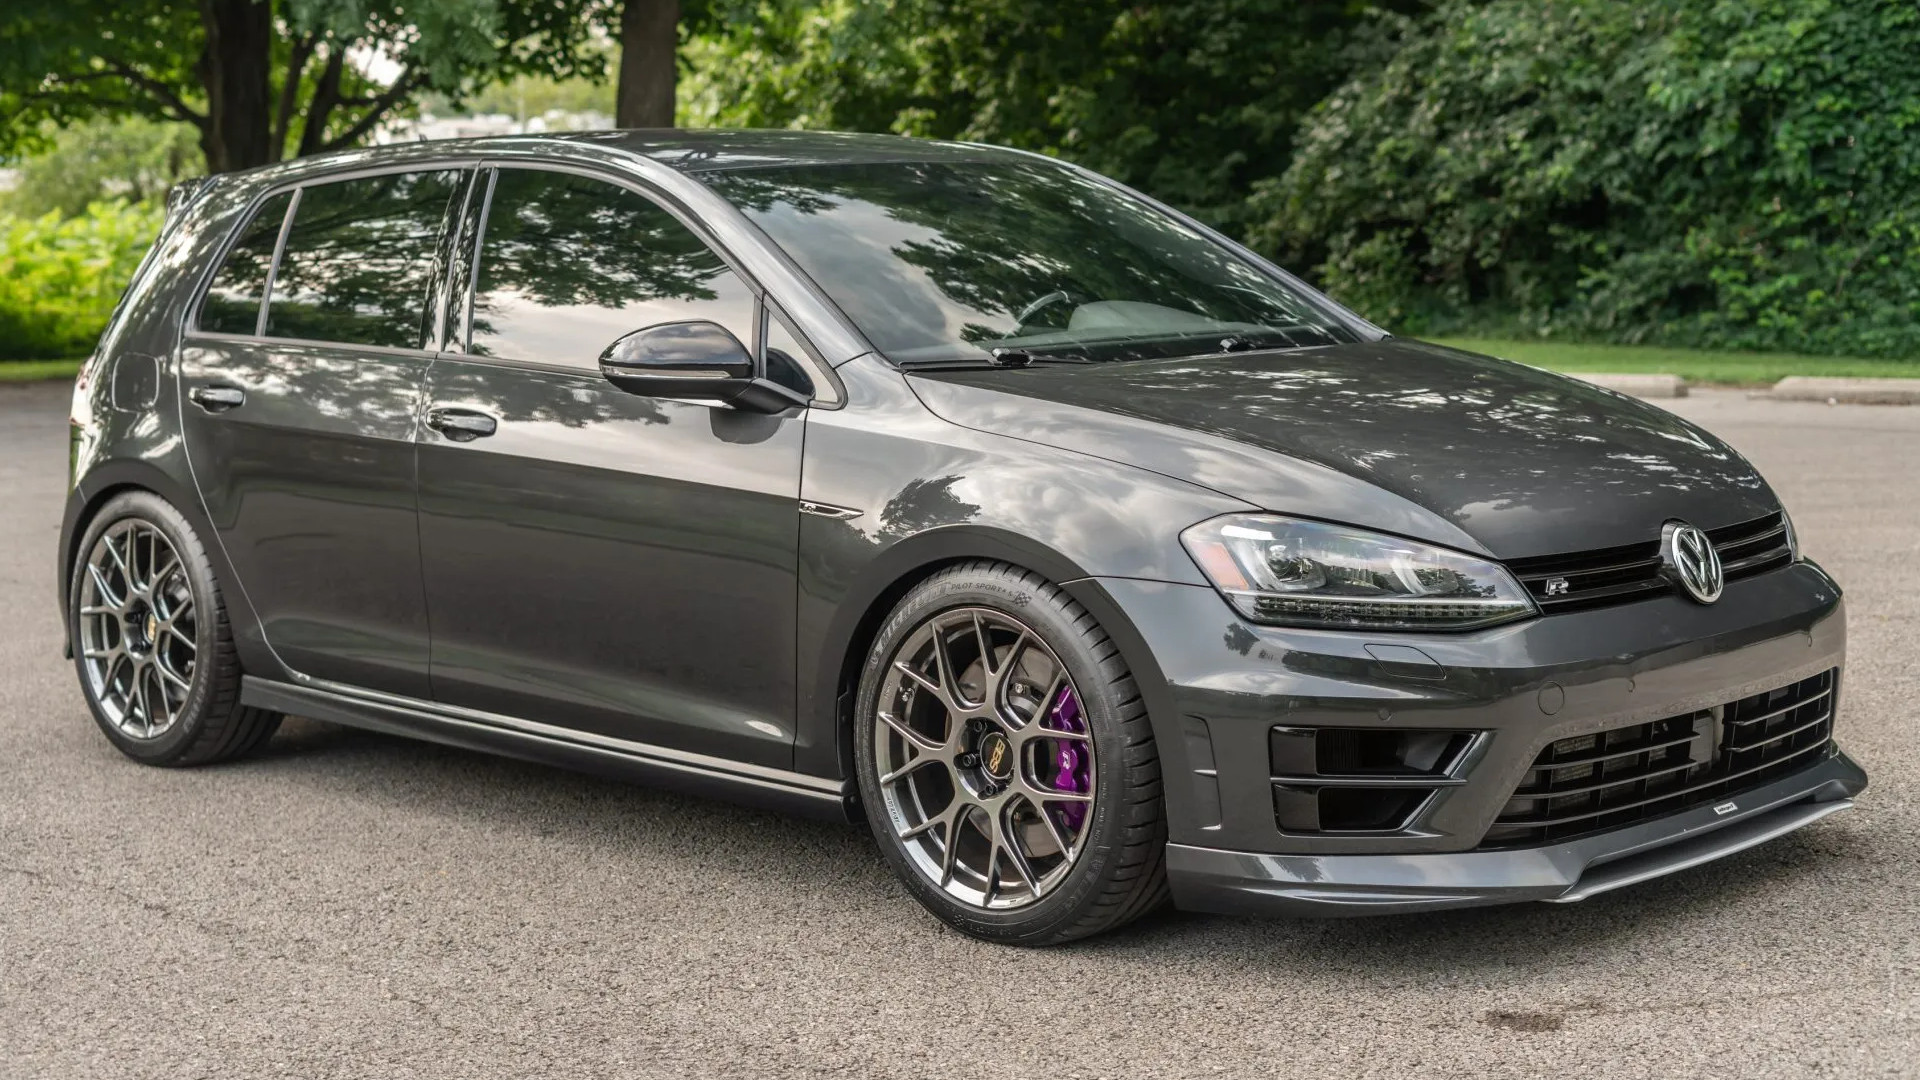 VW Golf R Painted the Wrong Color By the Factory is a One-of-a-Kind Mystery